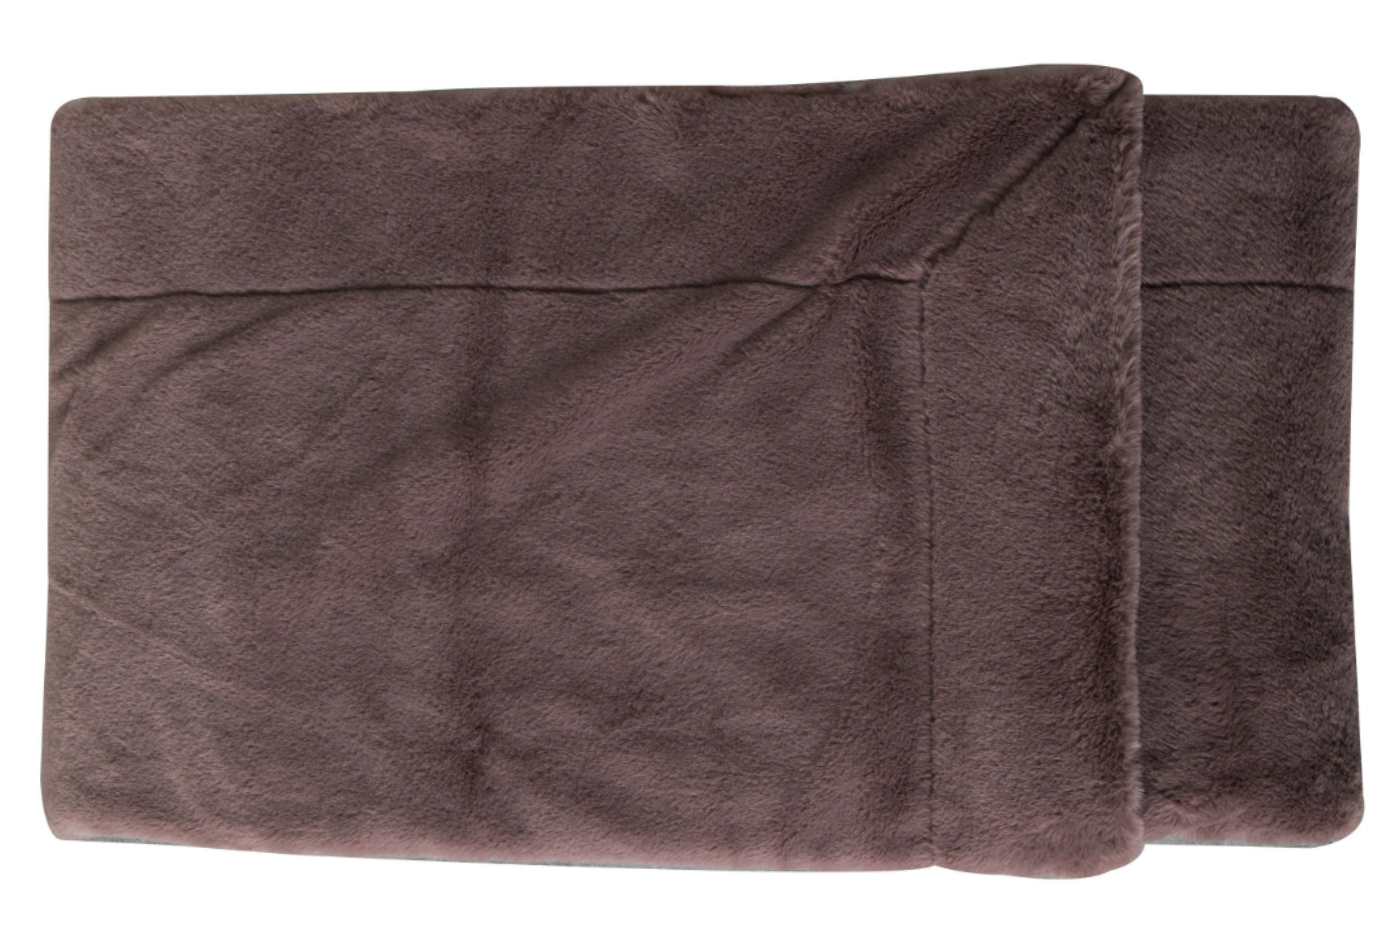 View Mocha Faux Fur Throw With Stitched Fold Over Border Small information